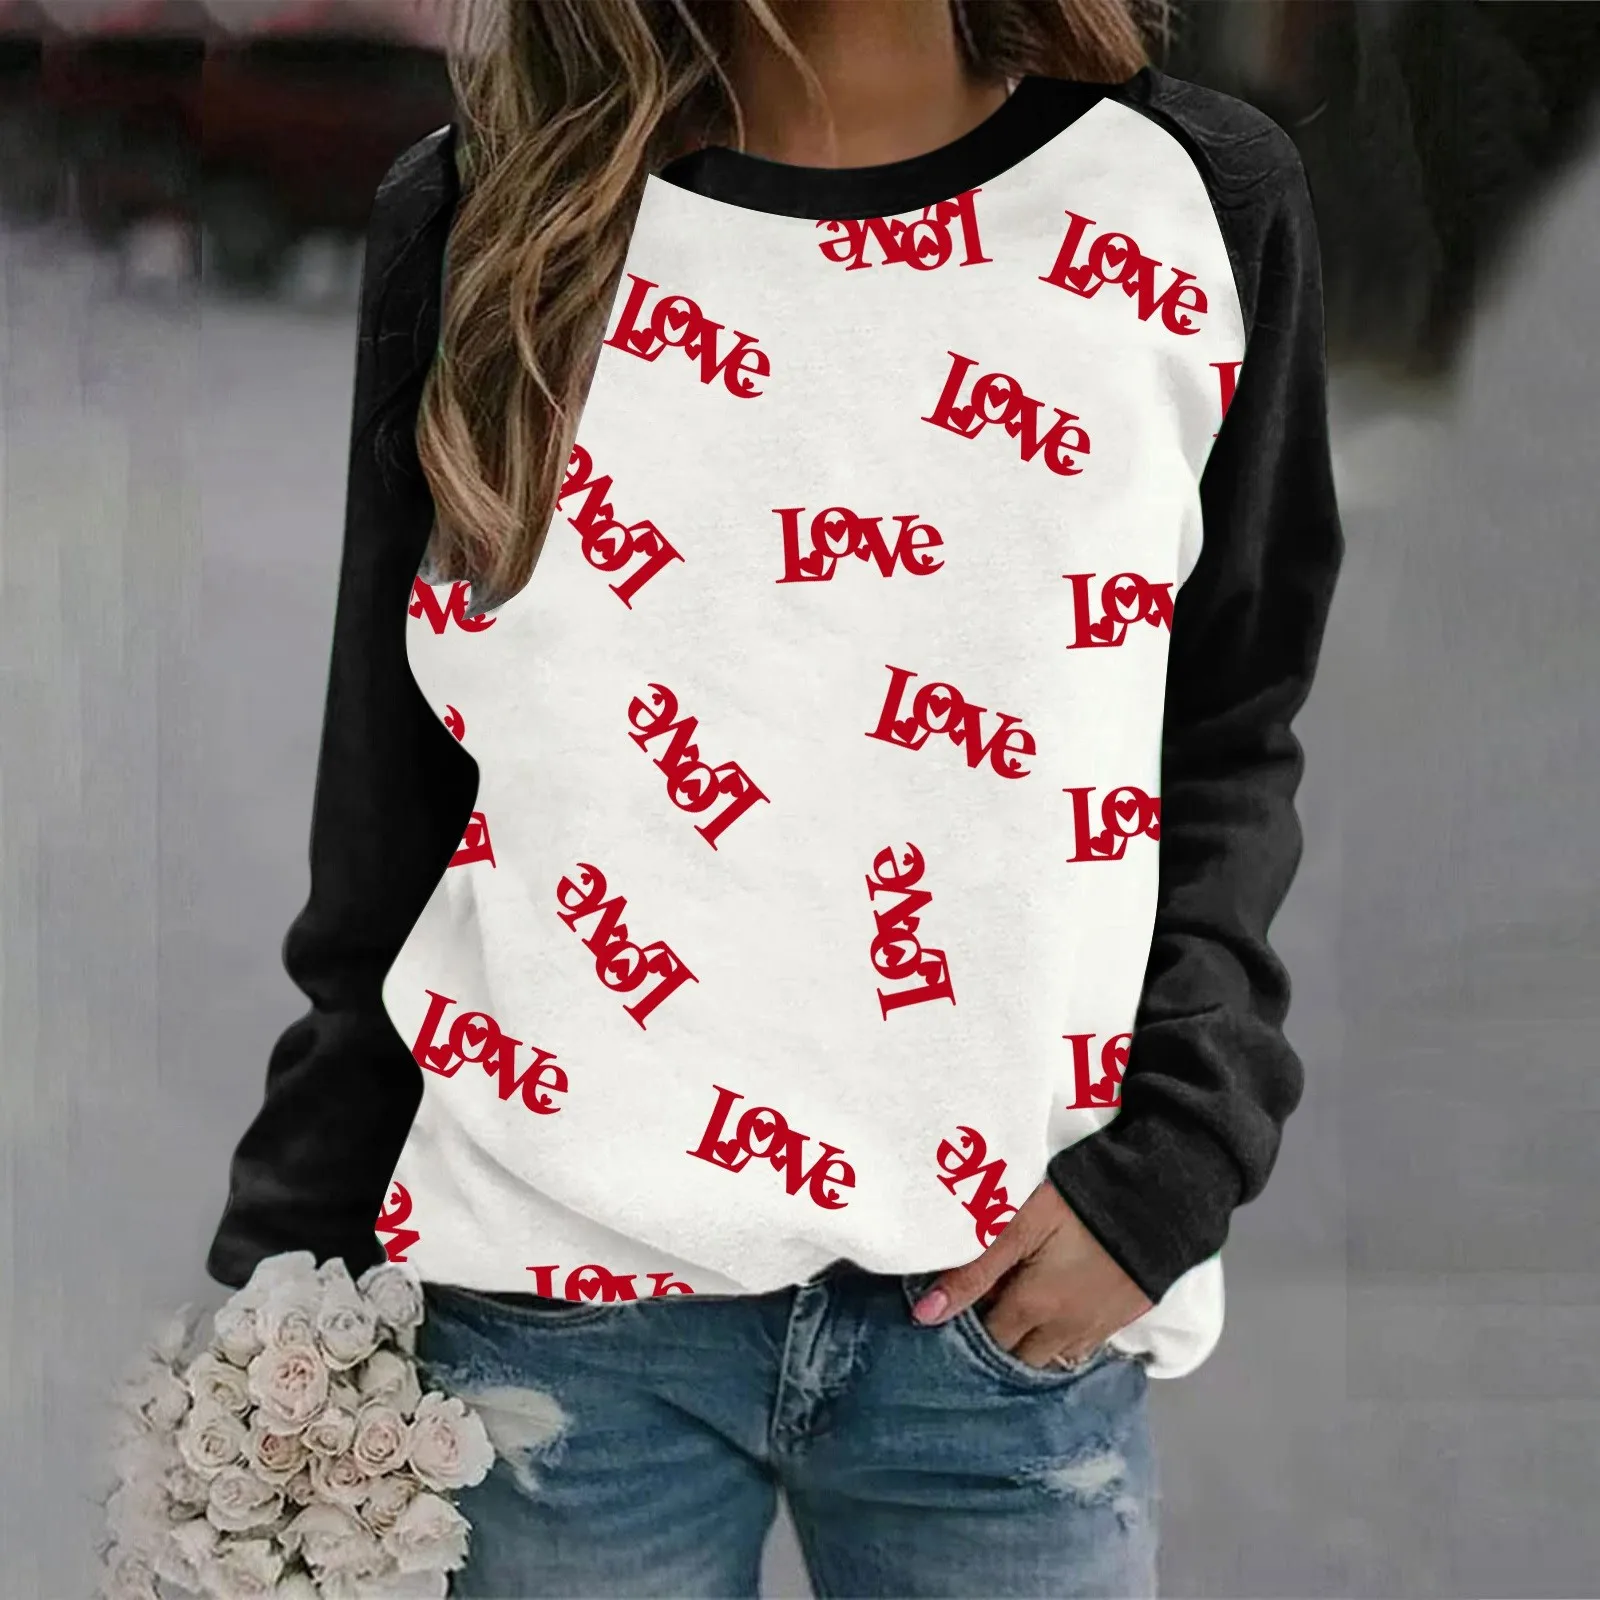 

Blouse Shirt Women's Love Letter Full Print Hatless Casual Crew Neck With Sleeve Hoodie Junior Girl Tops